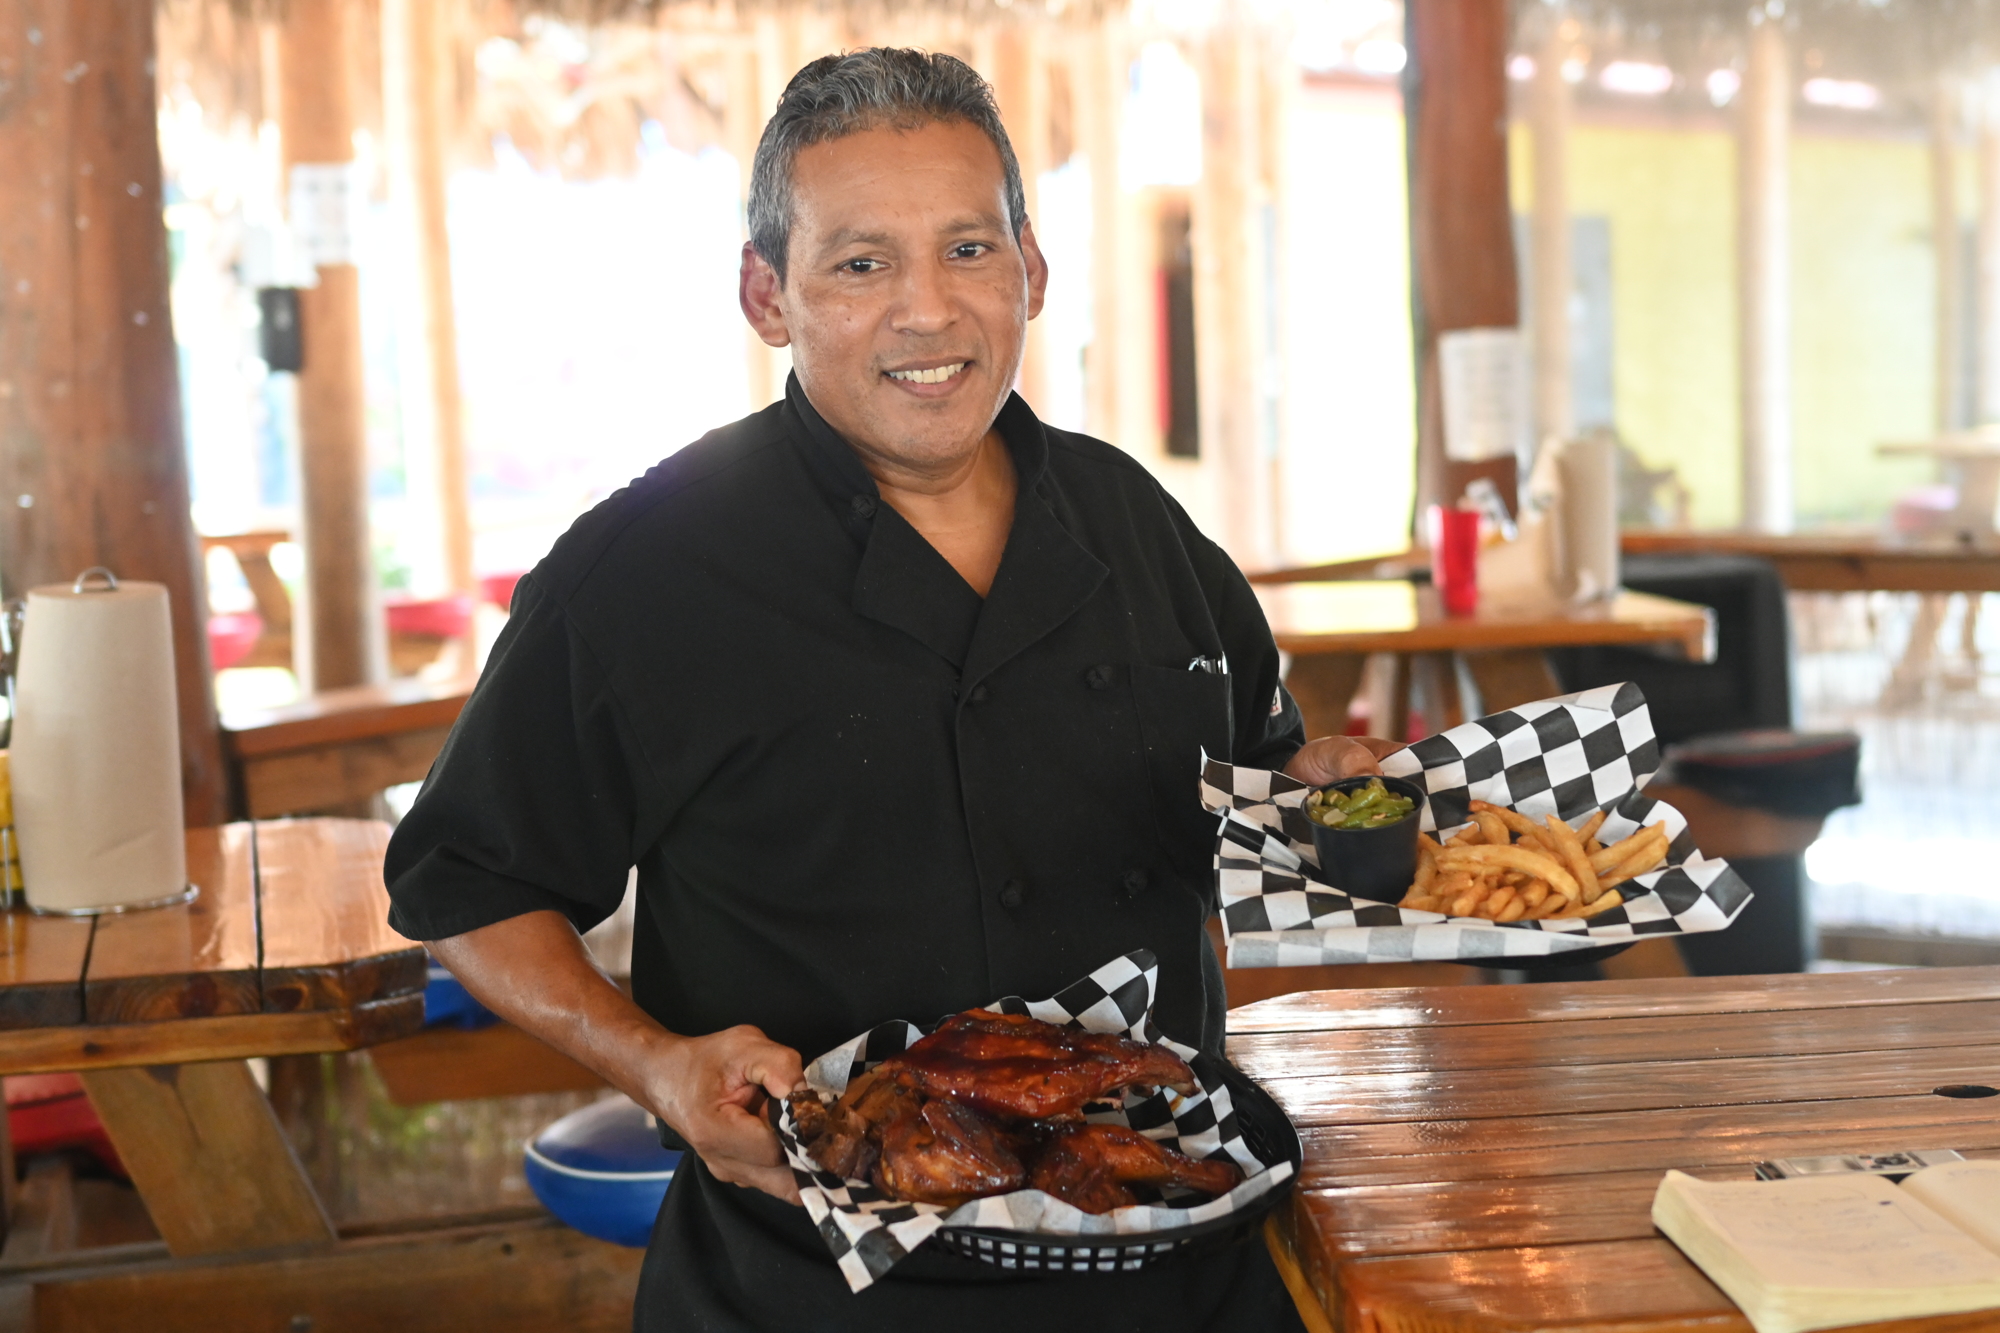 Kitchen manager Felix Morales says Stottlemyer's is cooking up to 40 pounds of brisket per night. (Photo by Spencer Fordin)